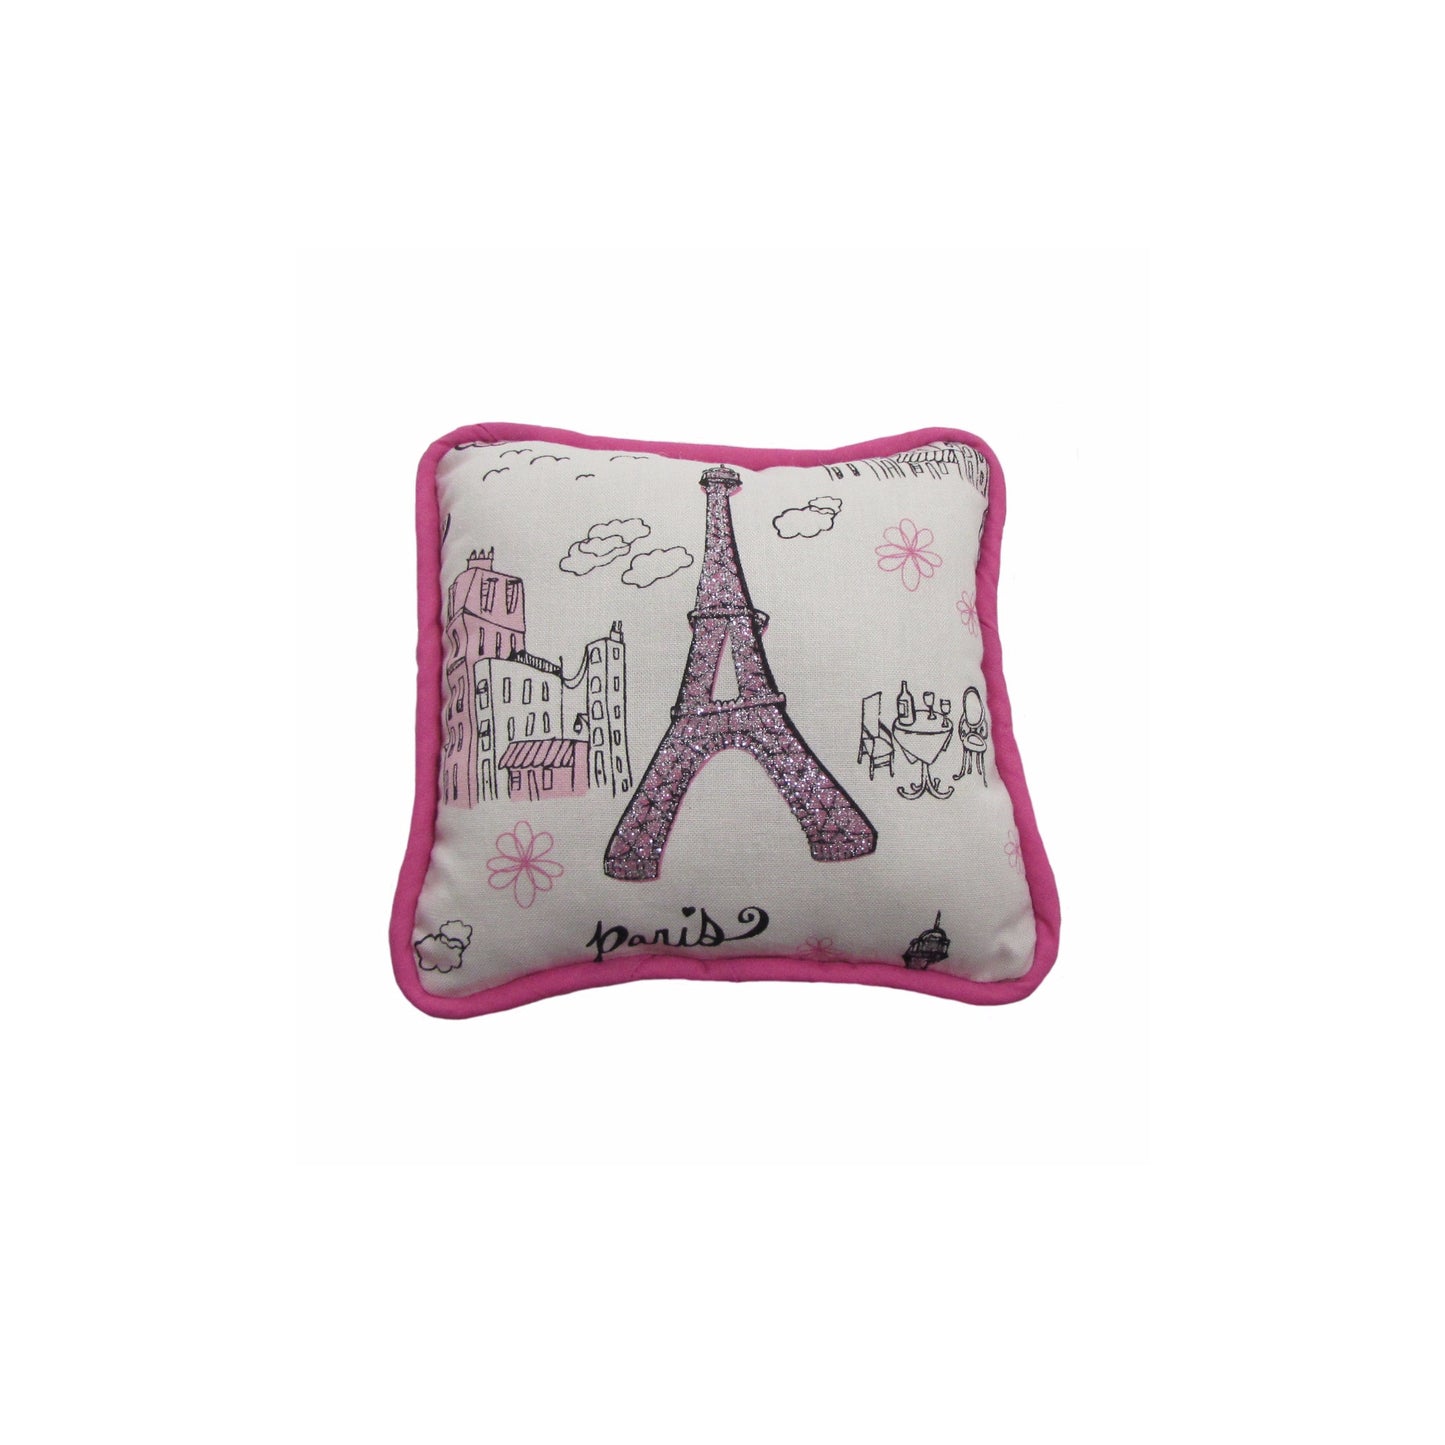 Pink Trimmed Square Paris Doll Pillow for 18-inch dolls